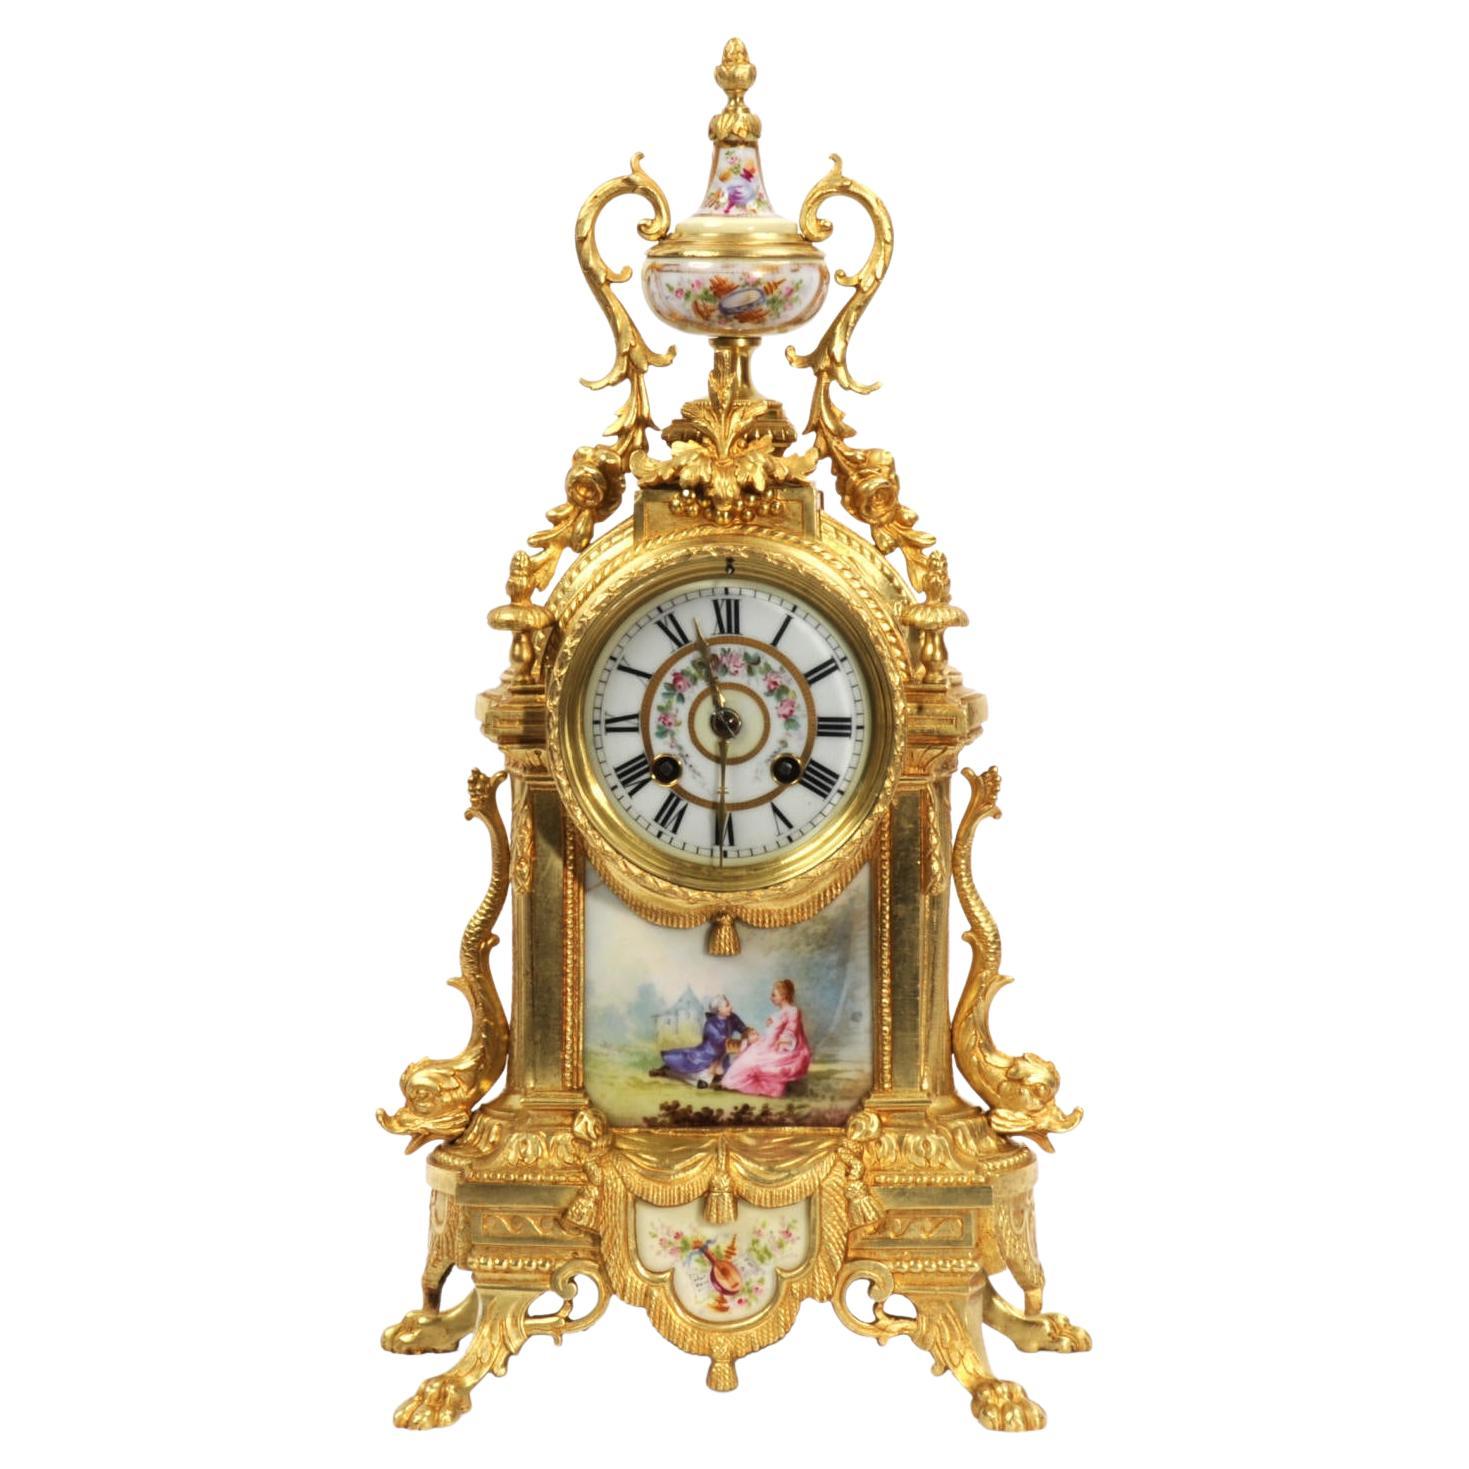 Japy Freres Louis XVI Gilt Bronze and Sevres Porcelain Antique French Clock